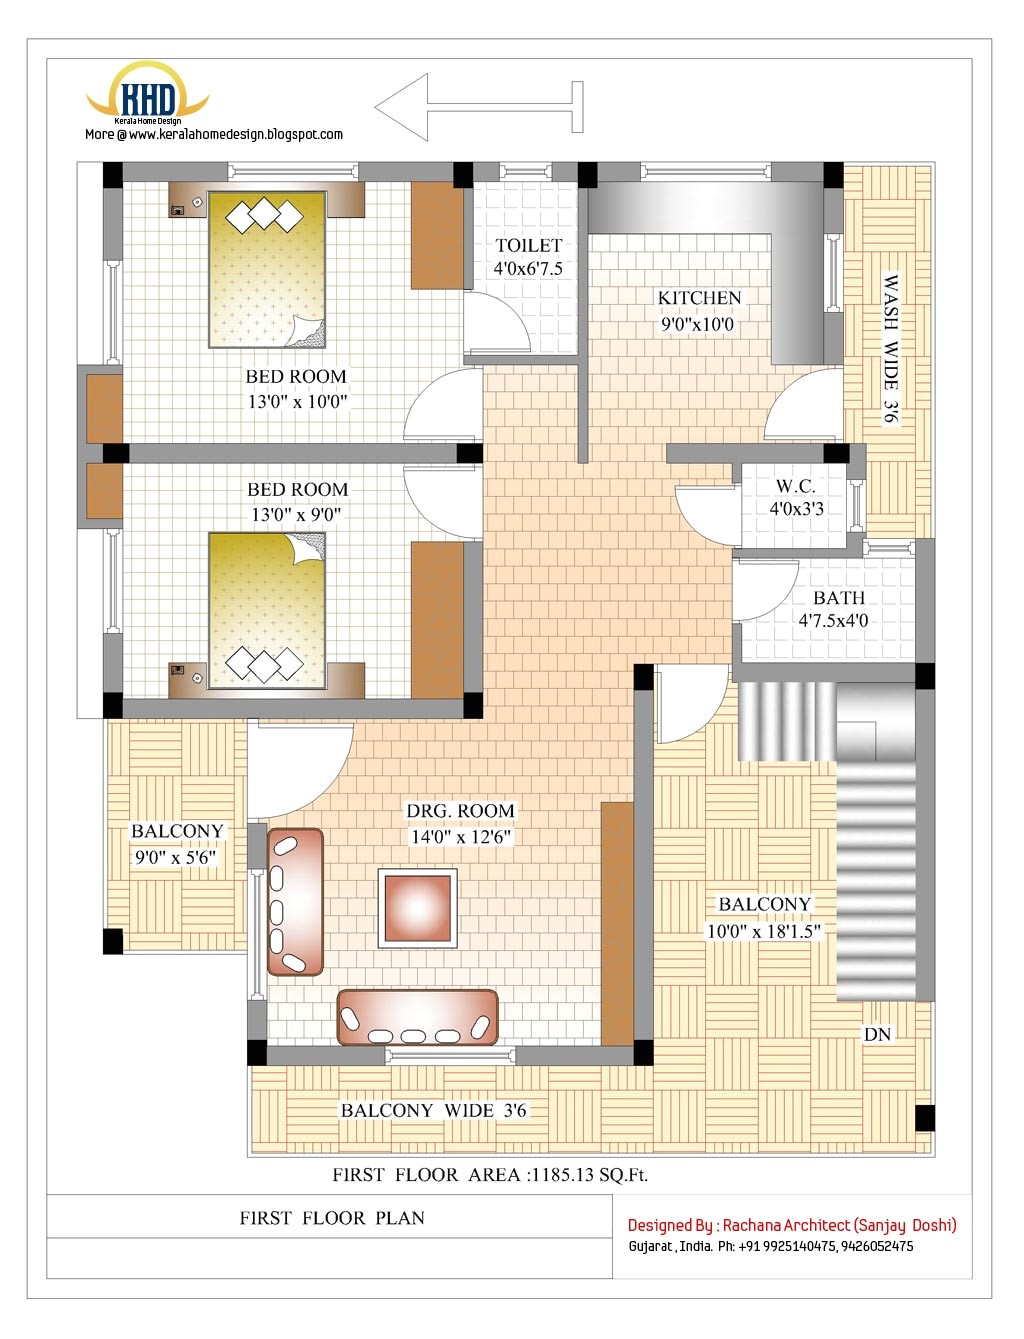 Floor Plans for Indian Homes 2370 Sq Ft Indian Style Home Design Kerala Home Design